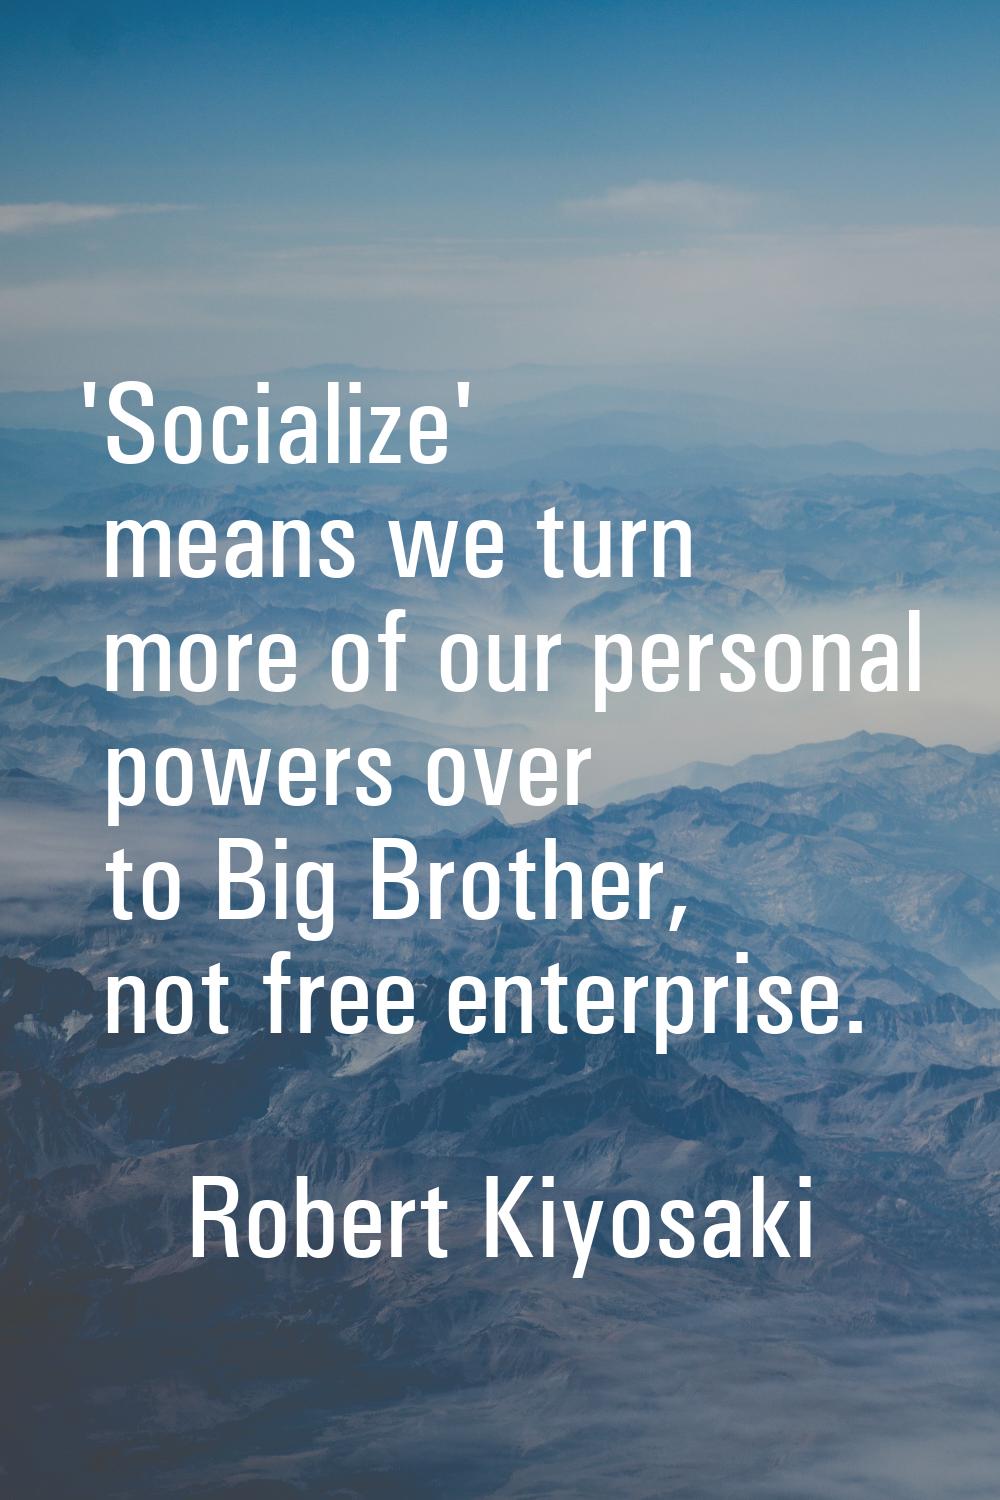 'Socialize' means we turn more of our personal powers over to Big Brother, not free enterprise.